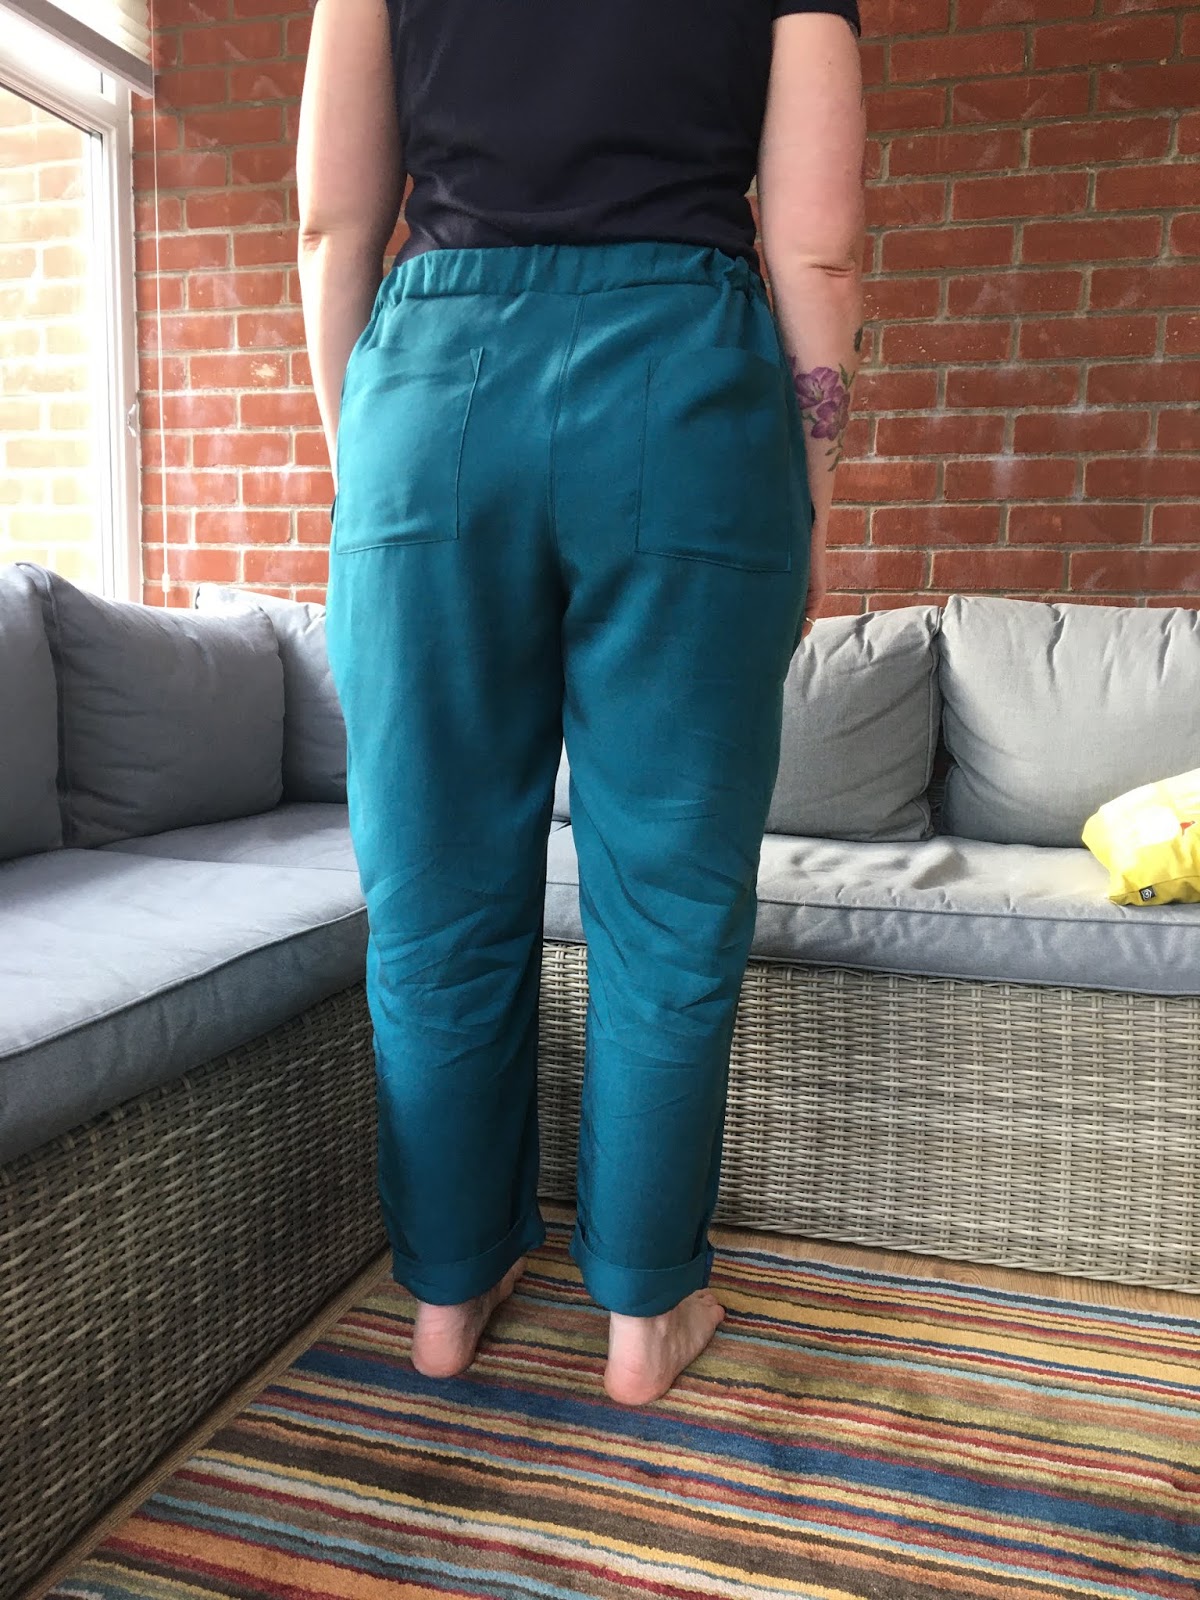 Crafty Clyde: Pants Off - Arden v Easy Pants (and a few extras)